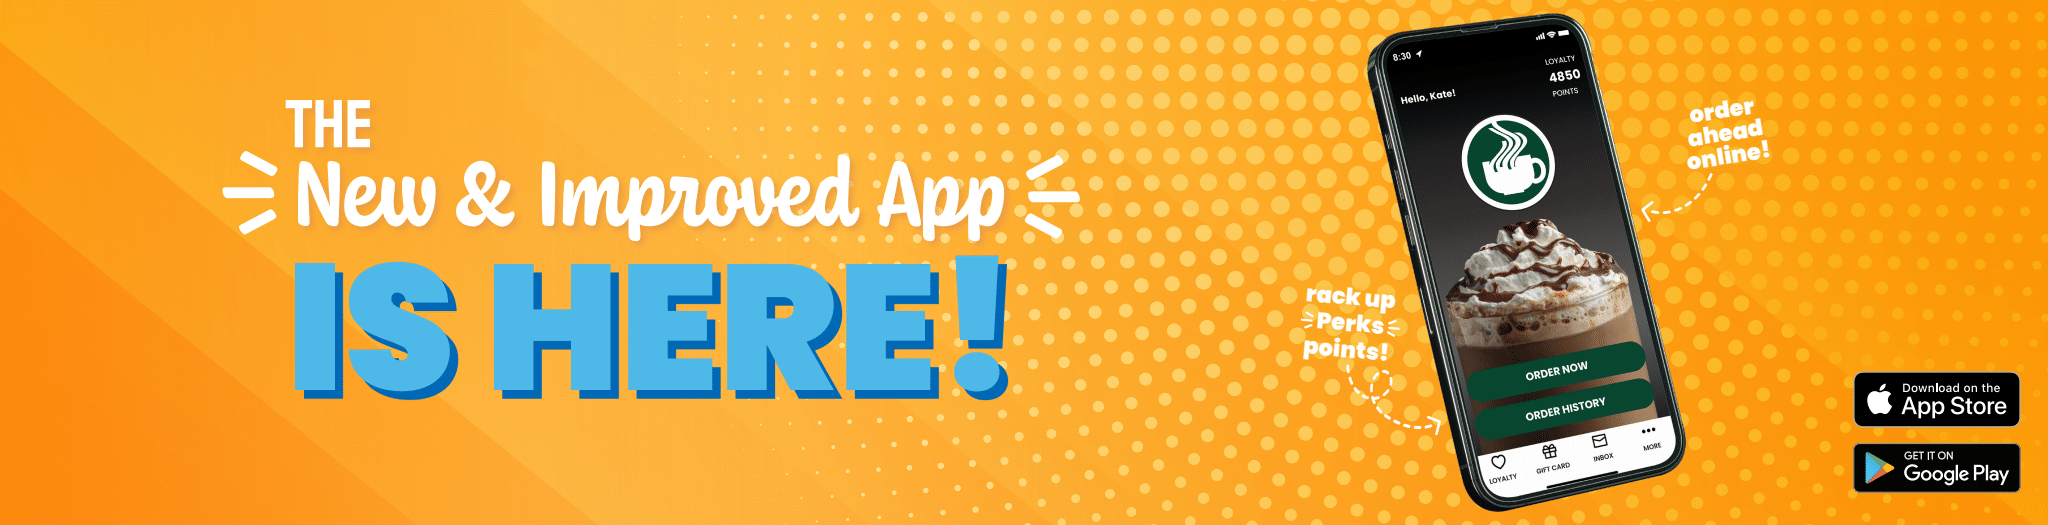 The New & Improved App is Here!